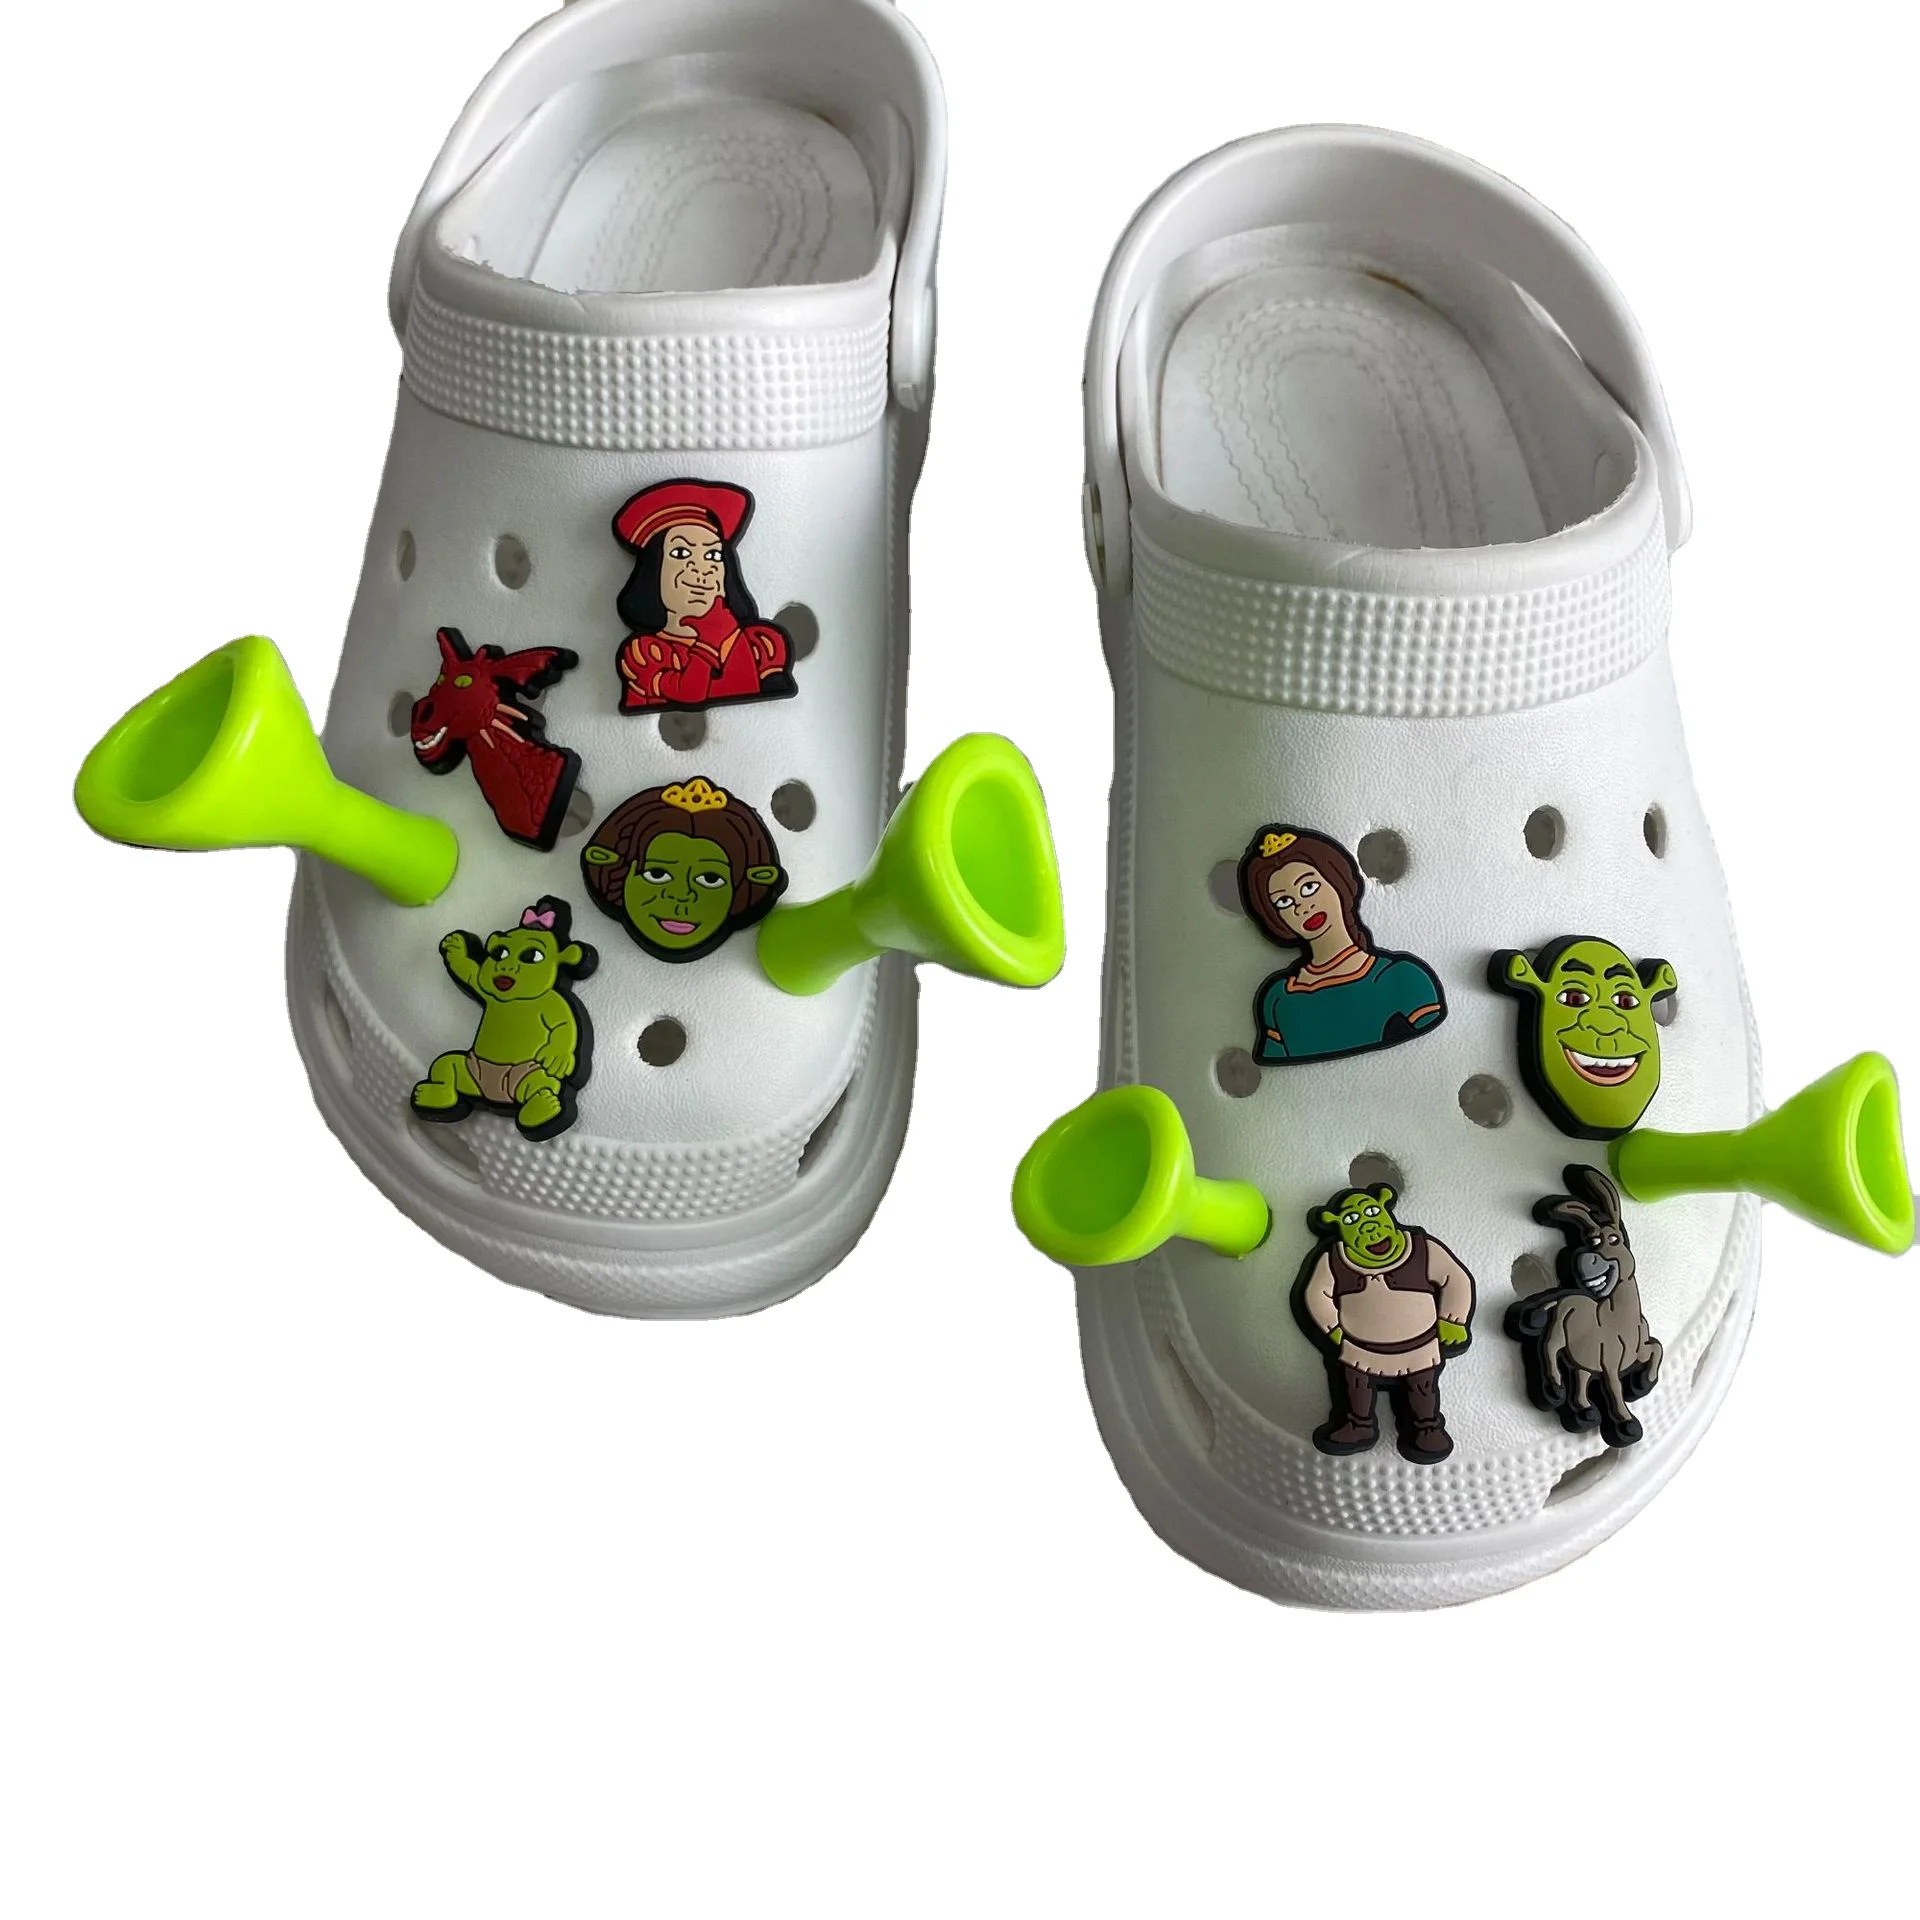 10 Pcs Shrek Theme Crocs Shoes Charms Cute Cartoon Style Shoe Decorations  Charms Shoes Accessories Set Birthday Gifts